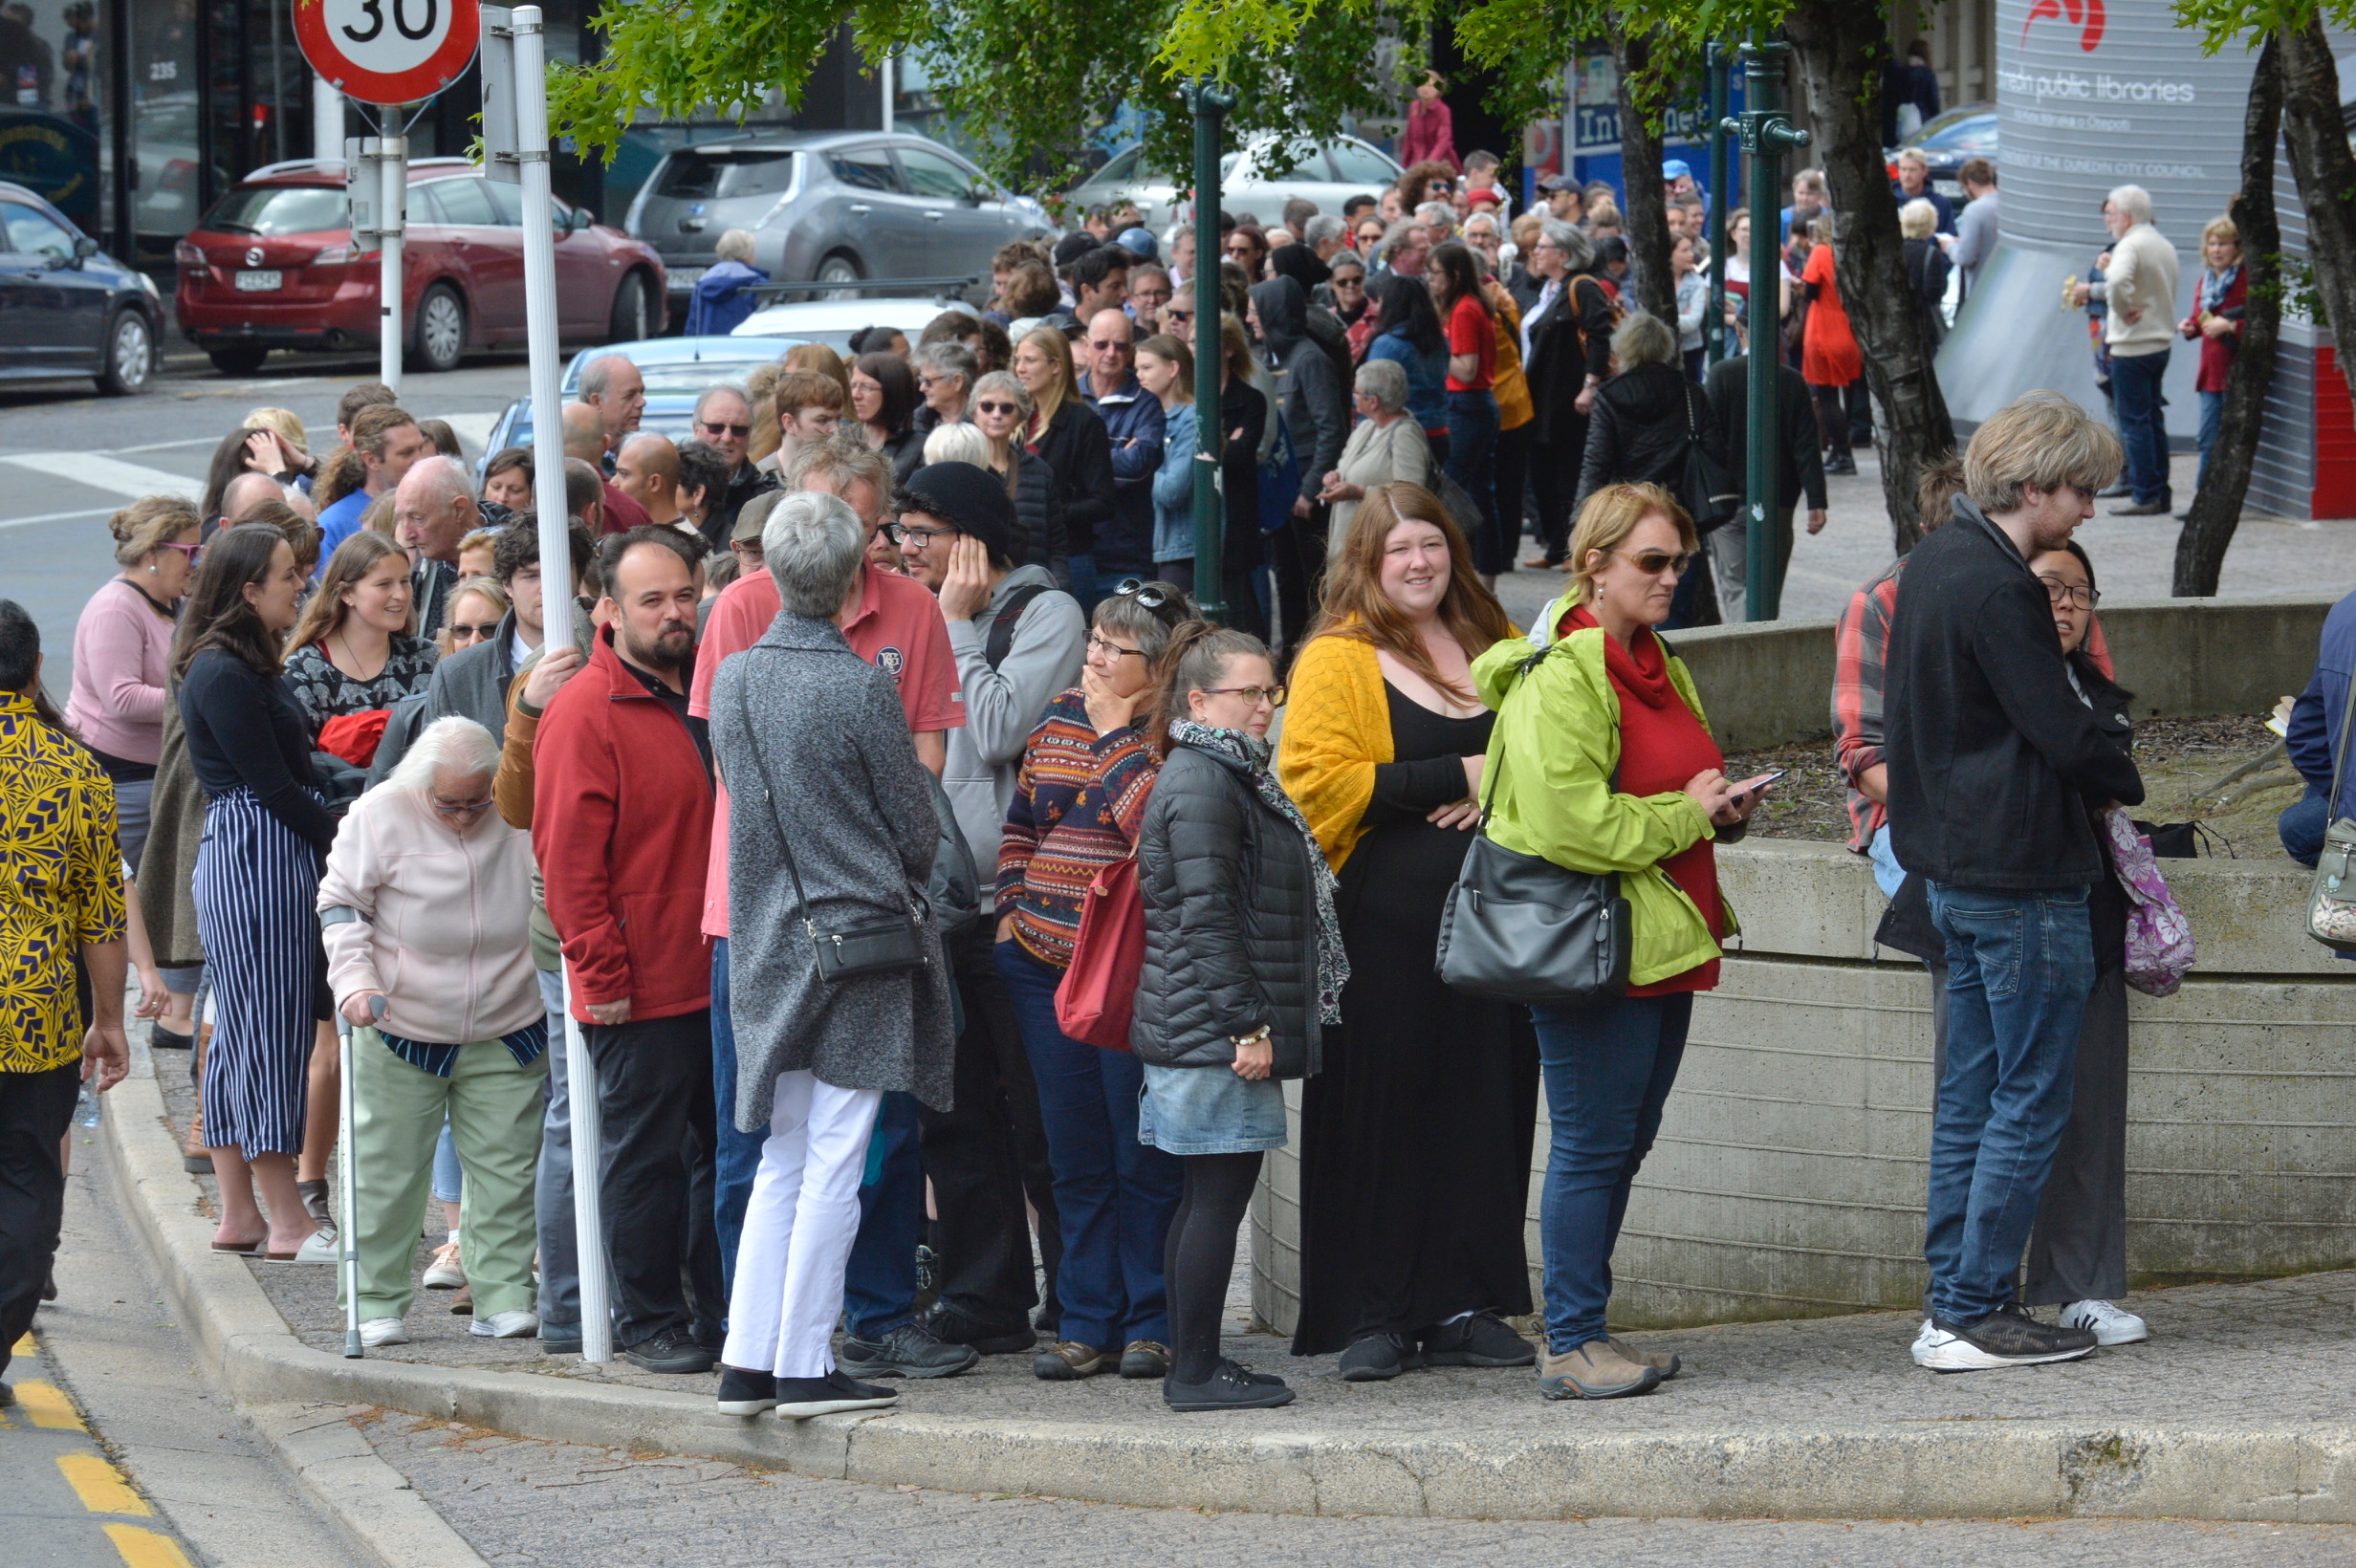 People queue in Moray Place as they wait to get into the Dunedin Town Hall to hear Prime Minister...